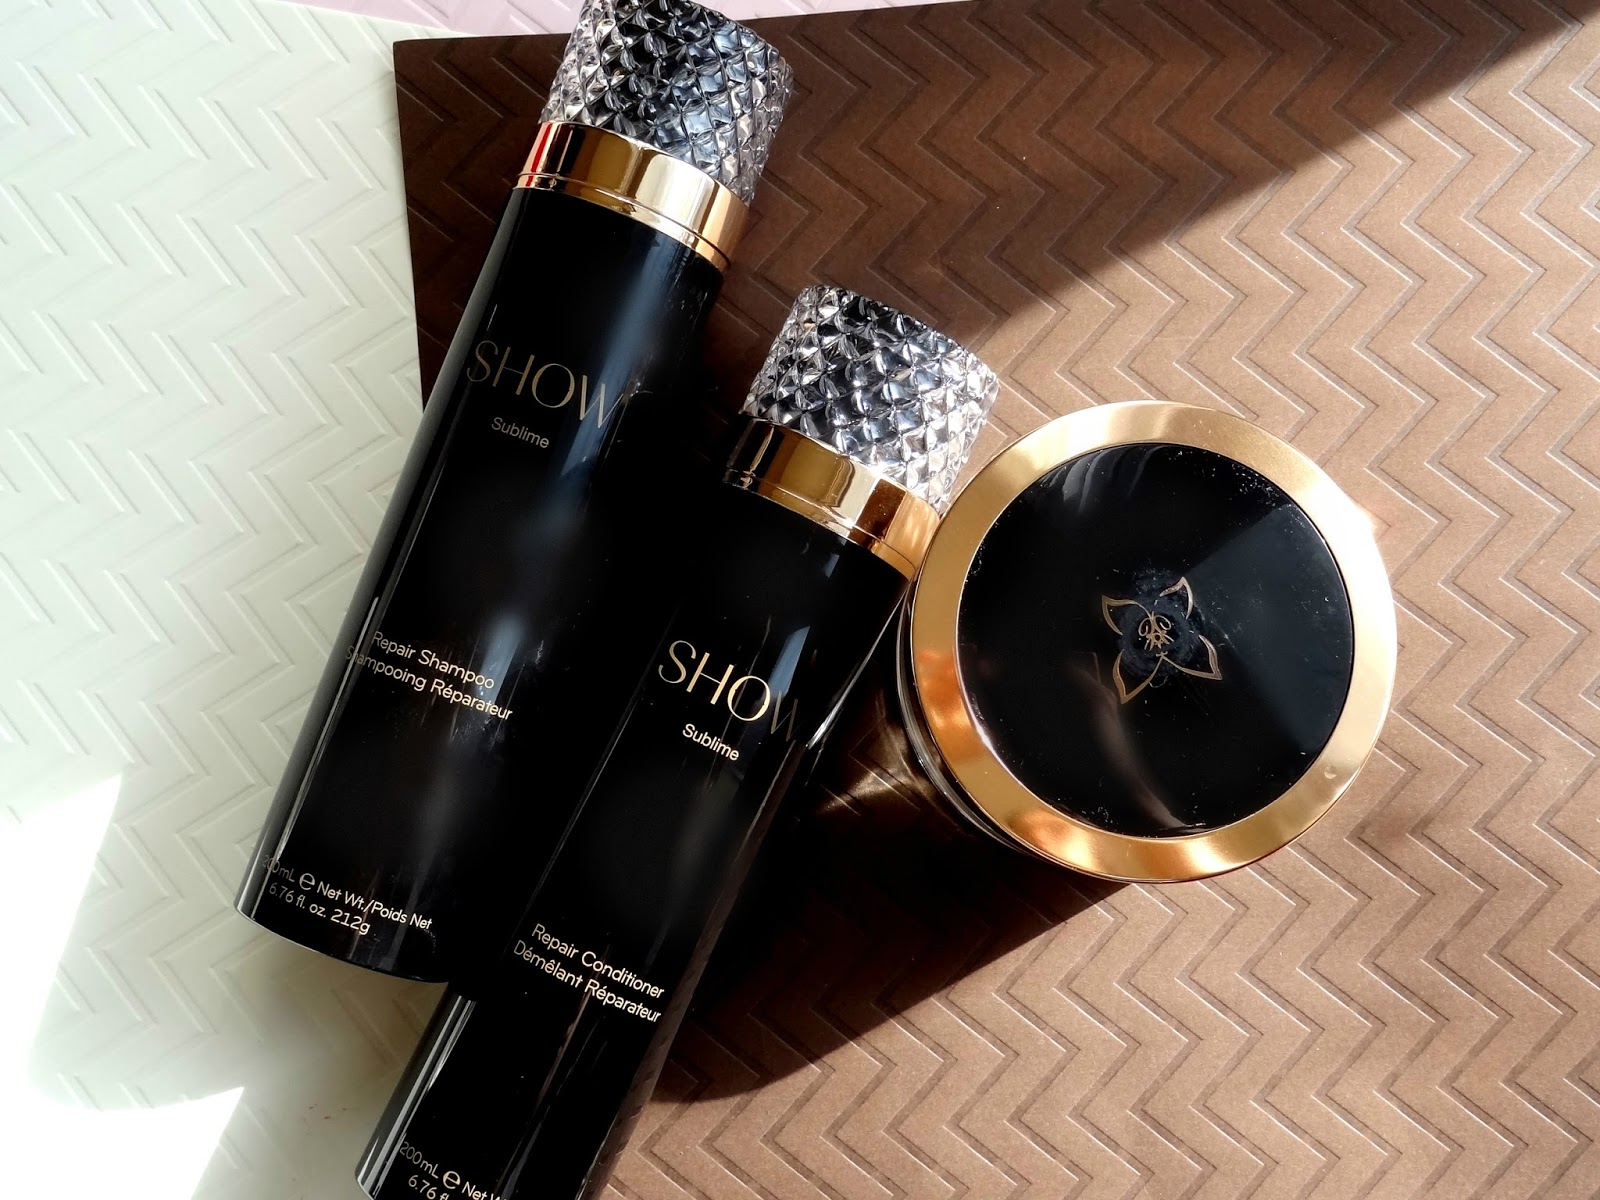 Makeup, Beauty More: SHOW Beauty Sublime Repair Shampoo, Conditioner and Repair Mask